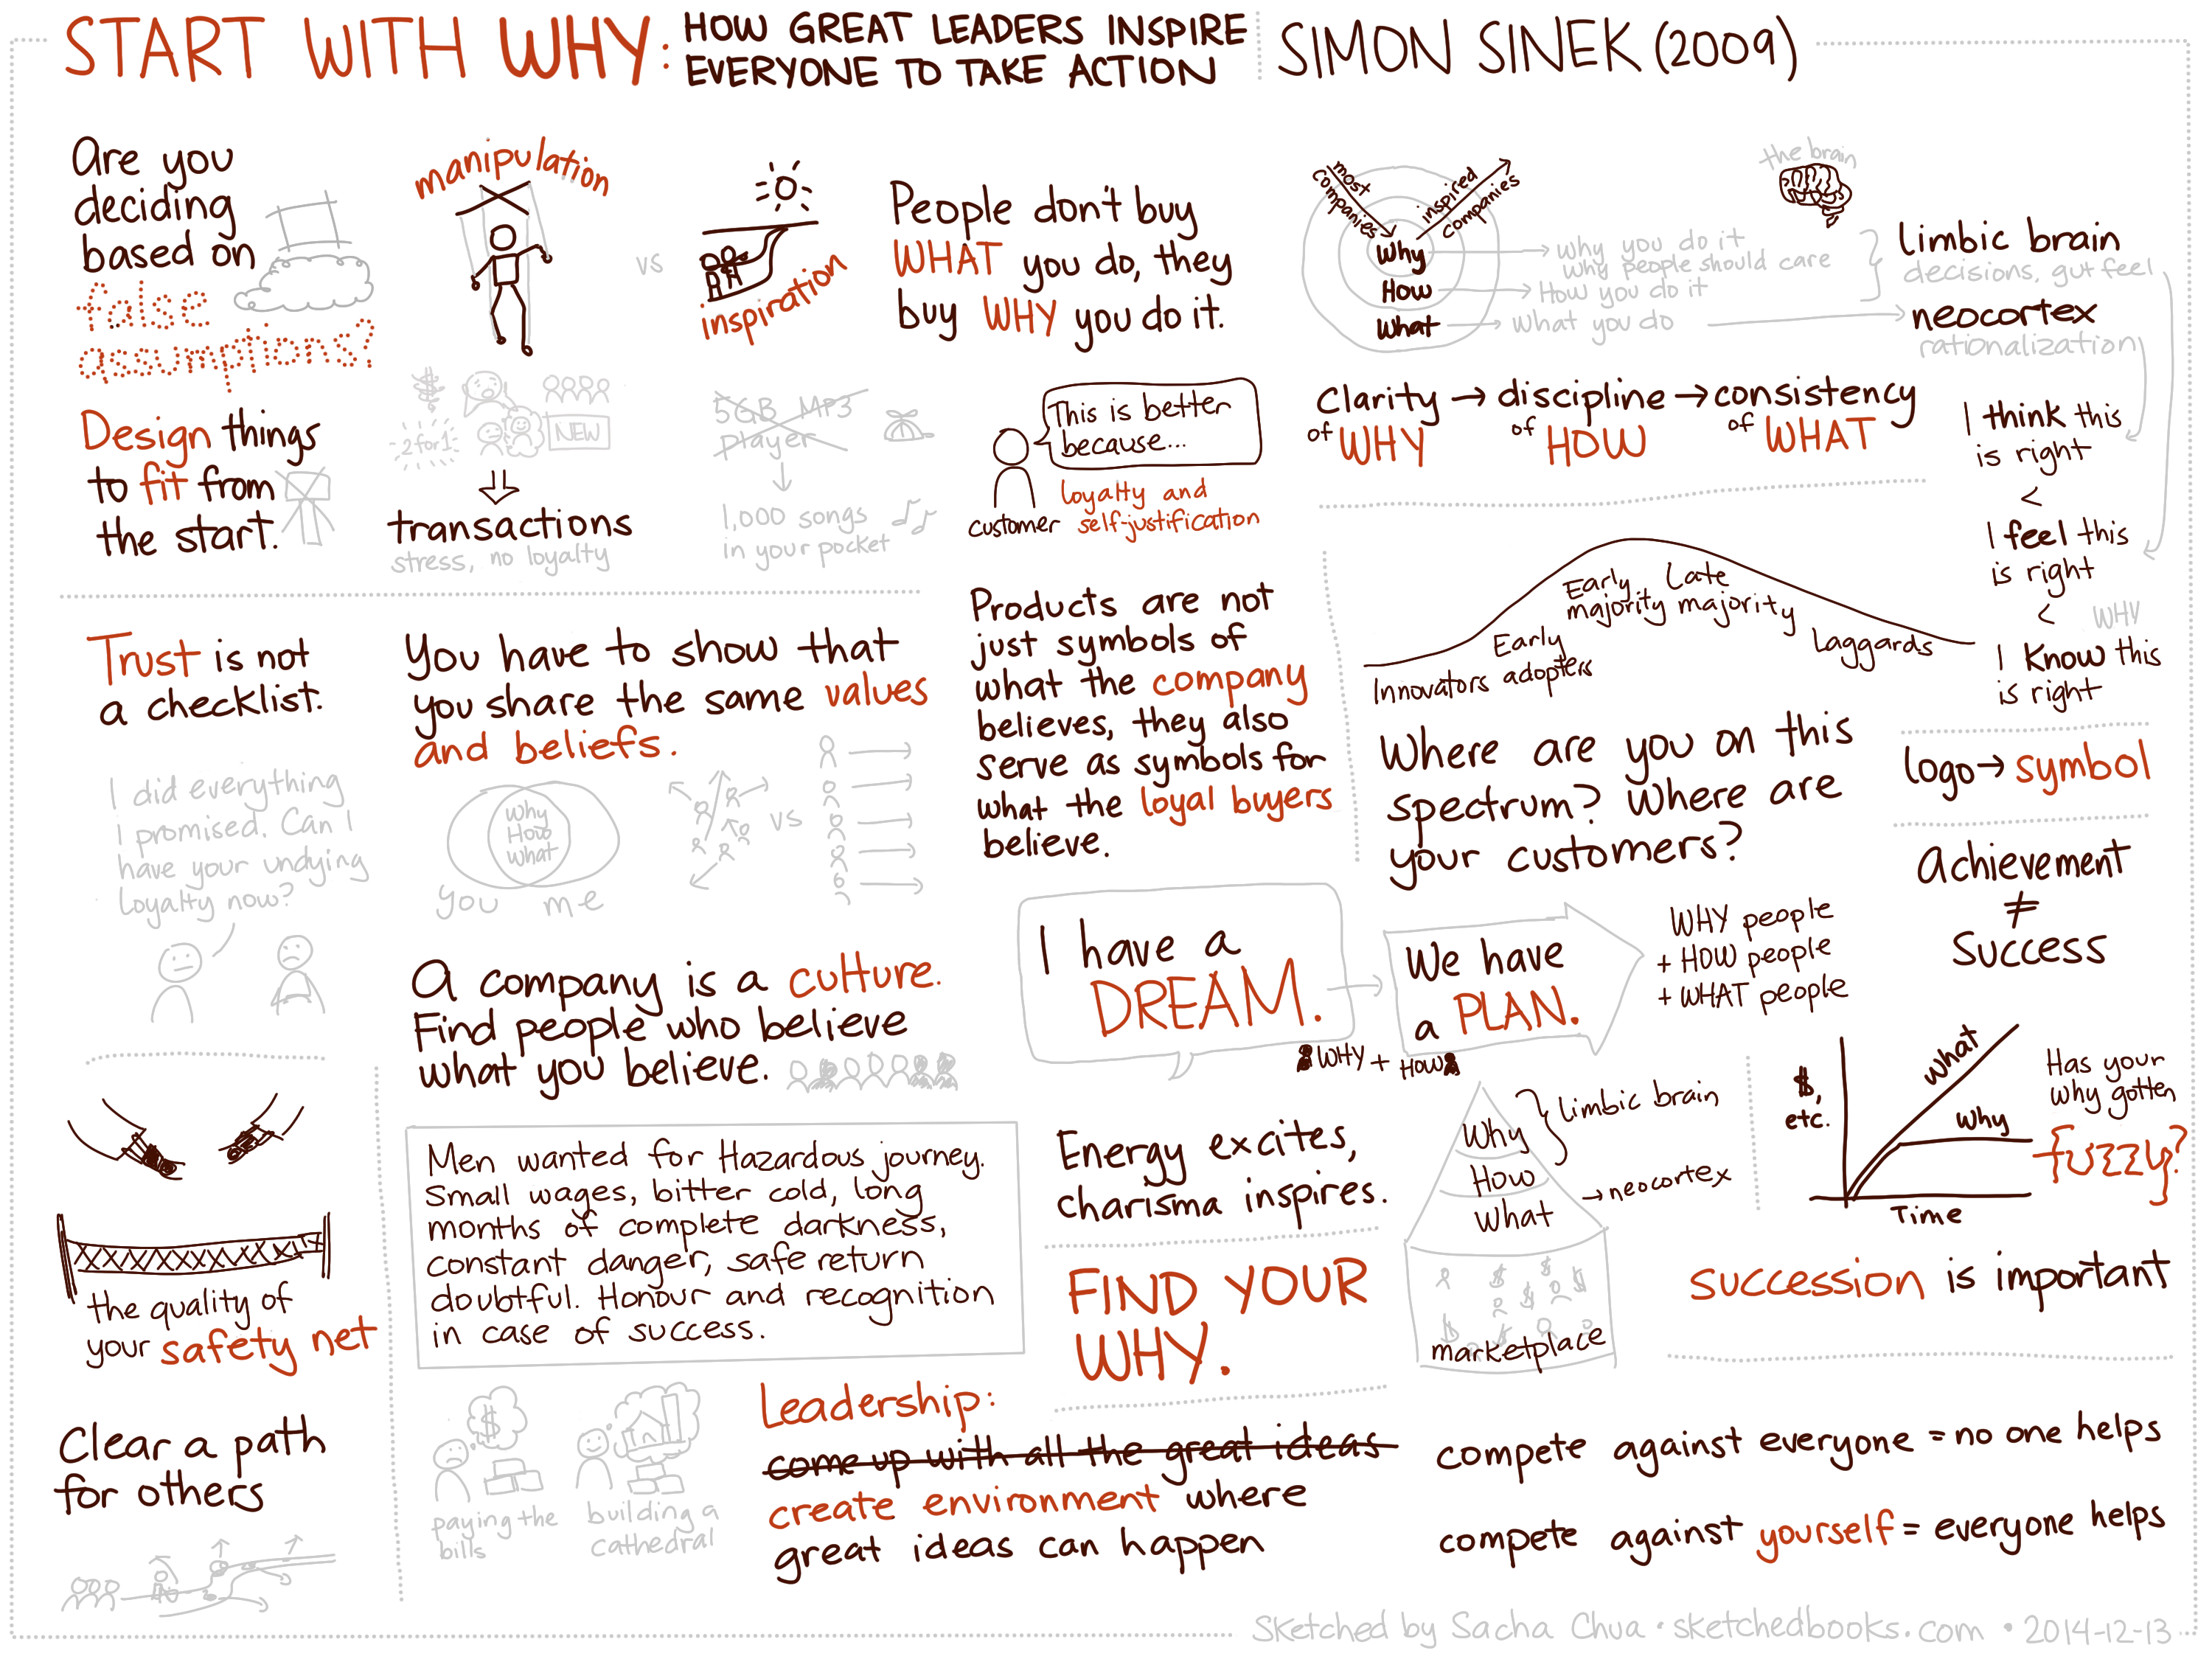 2014-12-13 Sketched Book - Start With Why - Simon Sinek.png